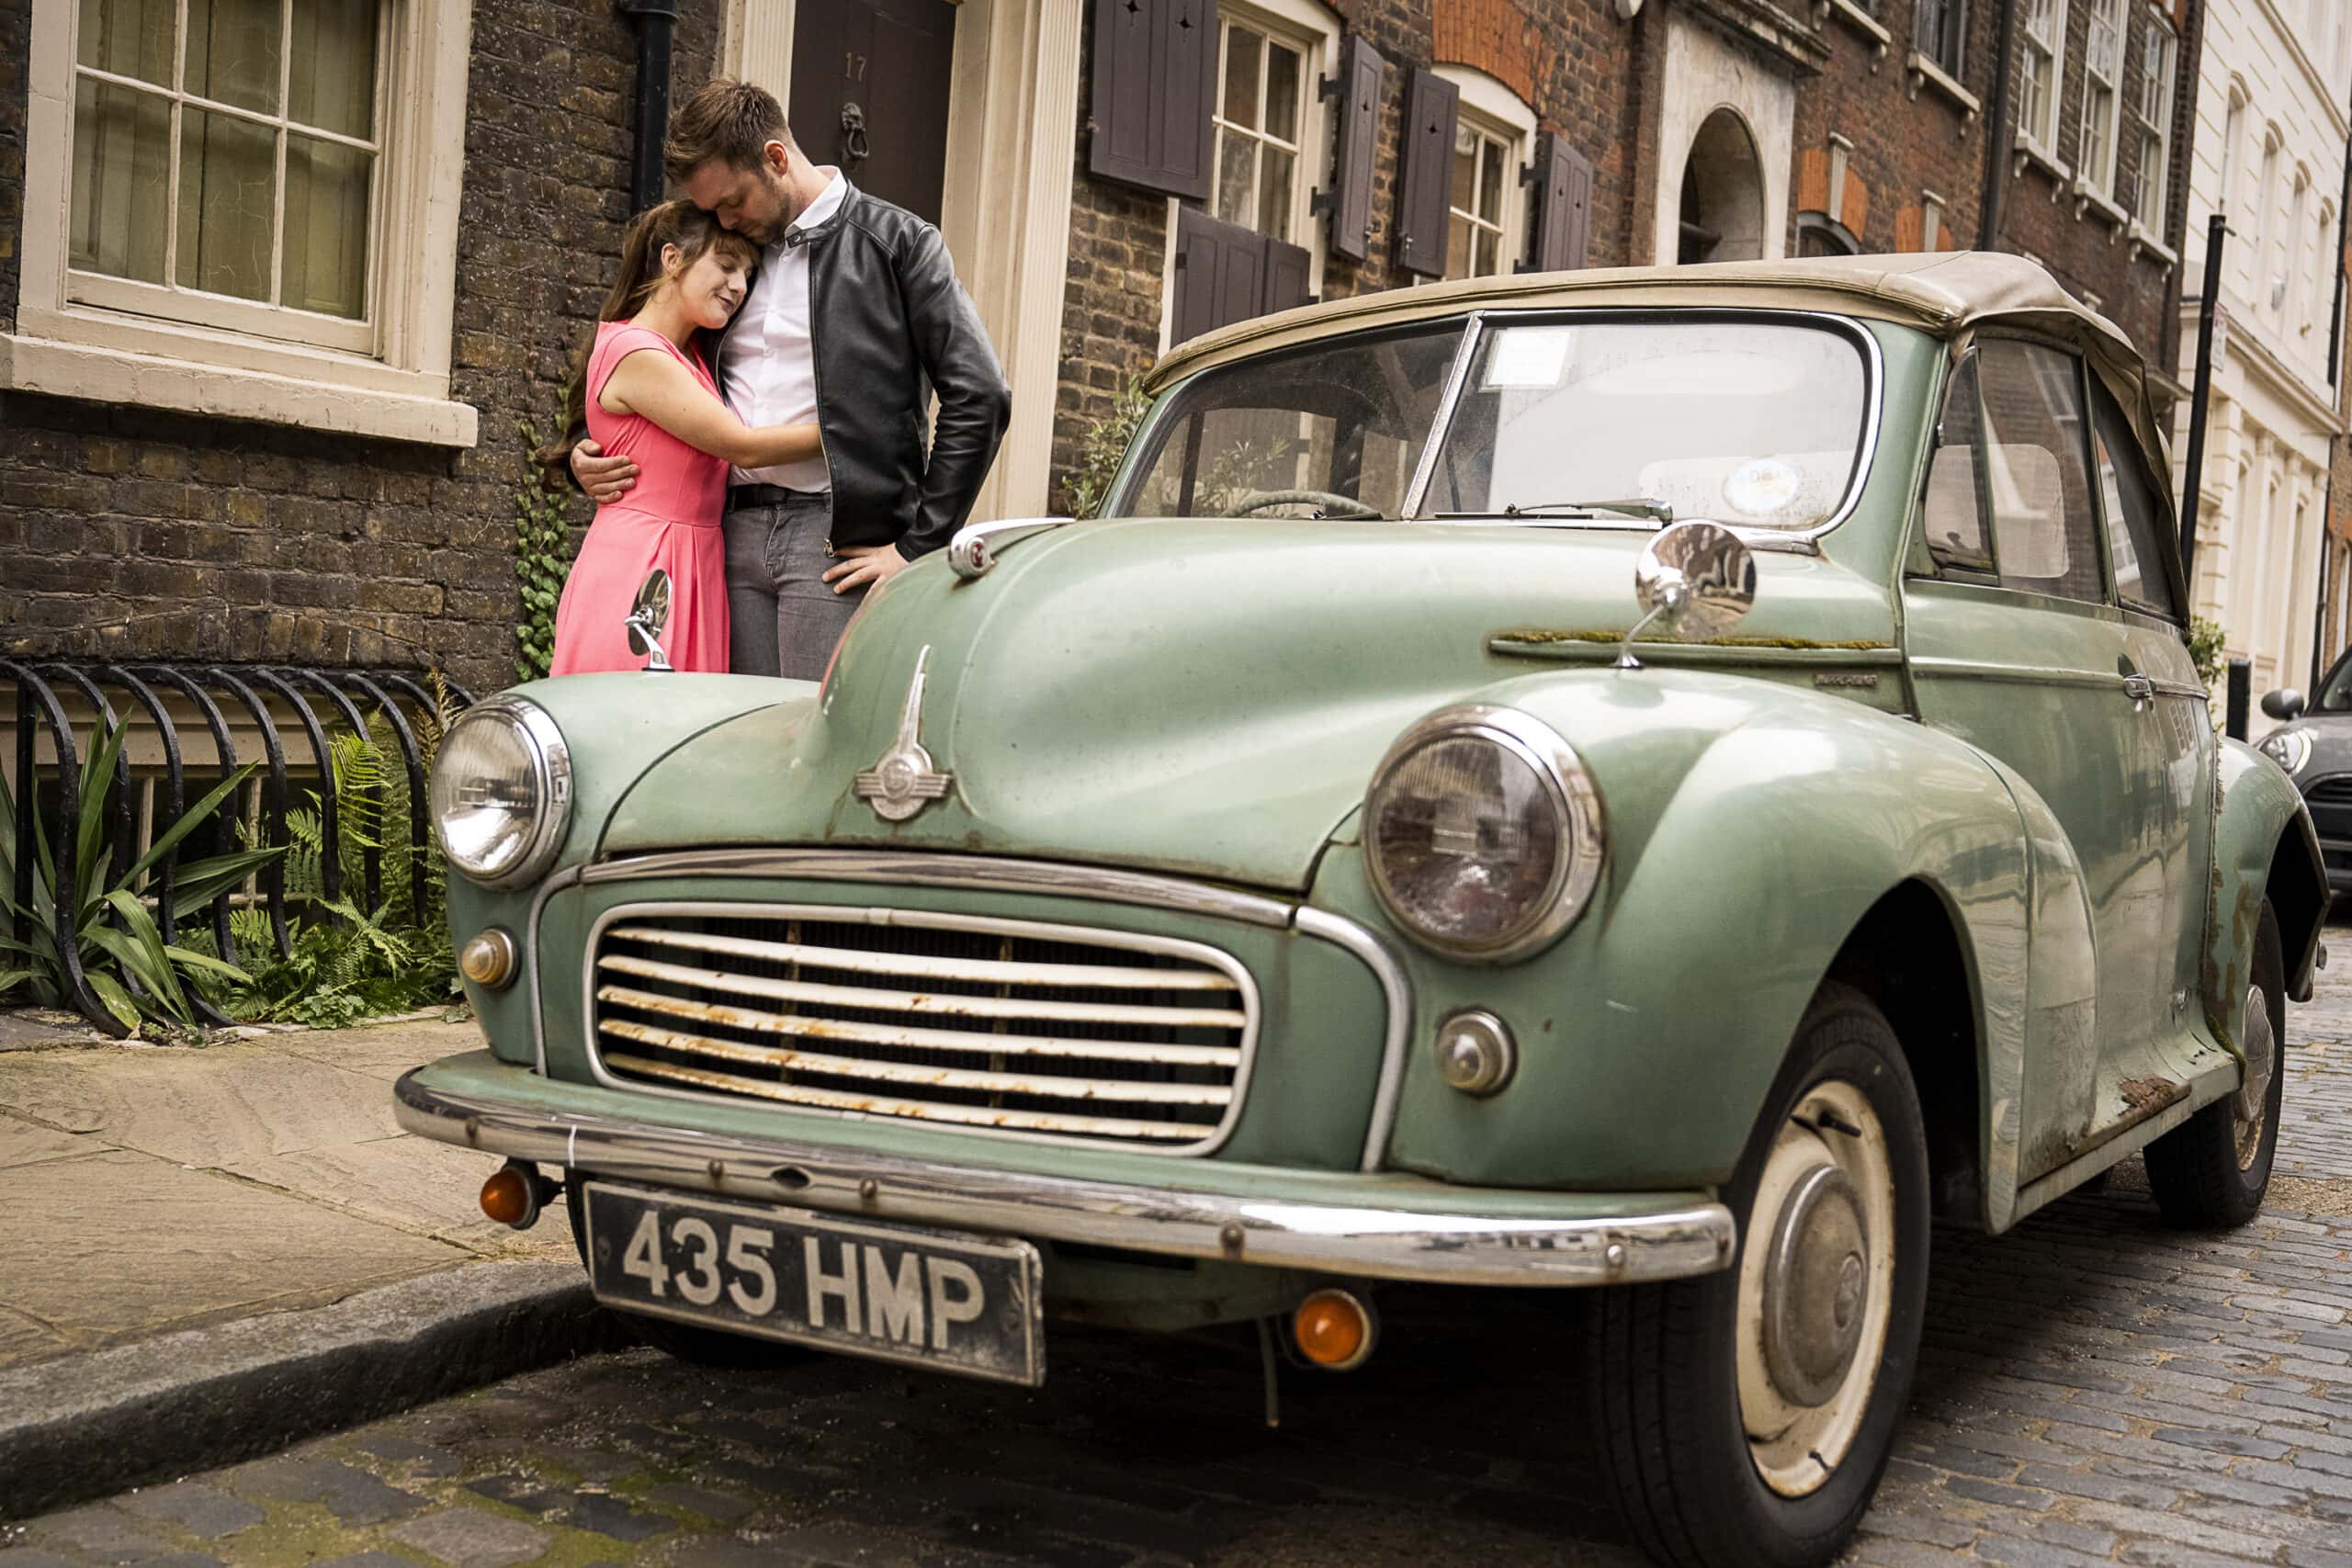 Couple with vintage car in Spitalfields